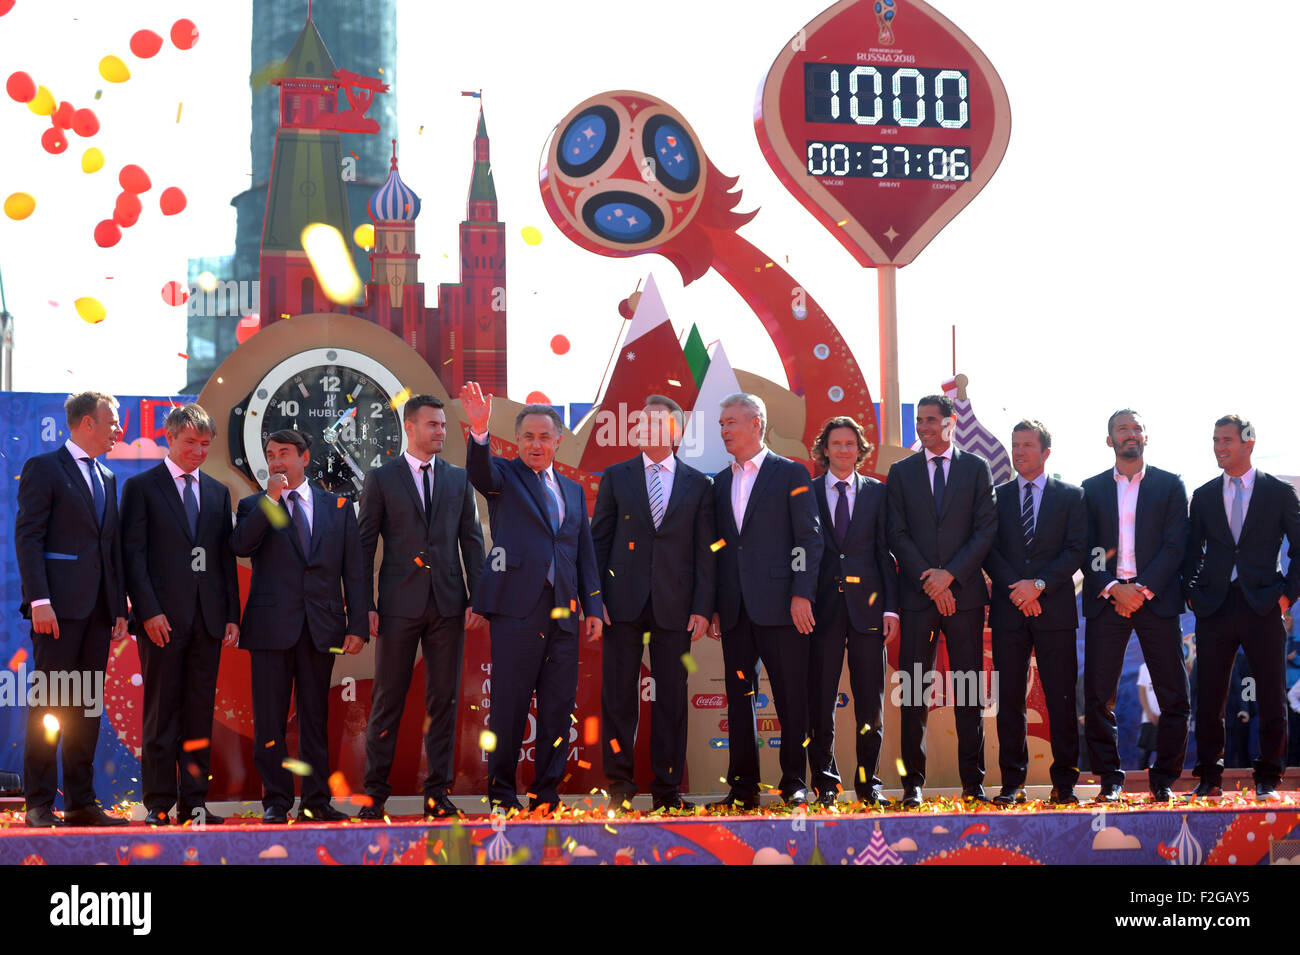 (150918) -- MOSCOW, Sept. 18, 2015 (Xinhua) -- FIFA's director of competition Colin Smith, Russia 2018 Organizing Committee General Director Alexei Sorokin, Russian Presidential Aide Igor Levitin, goalkeeper Igor Akinfeev of the Russian men's national football team, Russia's Sport Minister, Russian Football Union President Vitaly Mutko, Russia's First Deputy Prime Minister Igor Shuvalov, Moscow Mayor Sergei Sobyanin, Alexei Smertin, former member of the Russian men's national football team, Spain's former football player Fernando Hierro, Germany's former football player Lothar Matthaus, Italy' Stock Photo